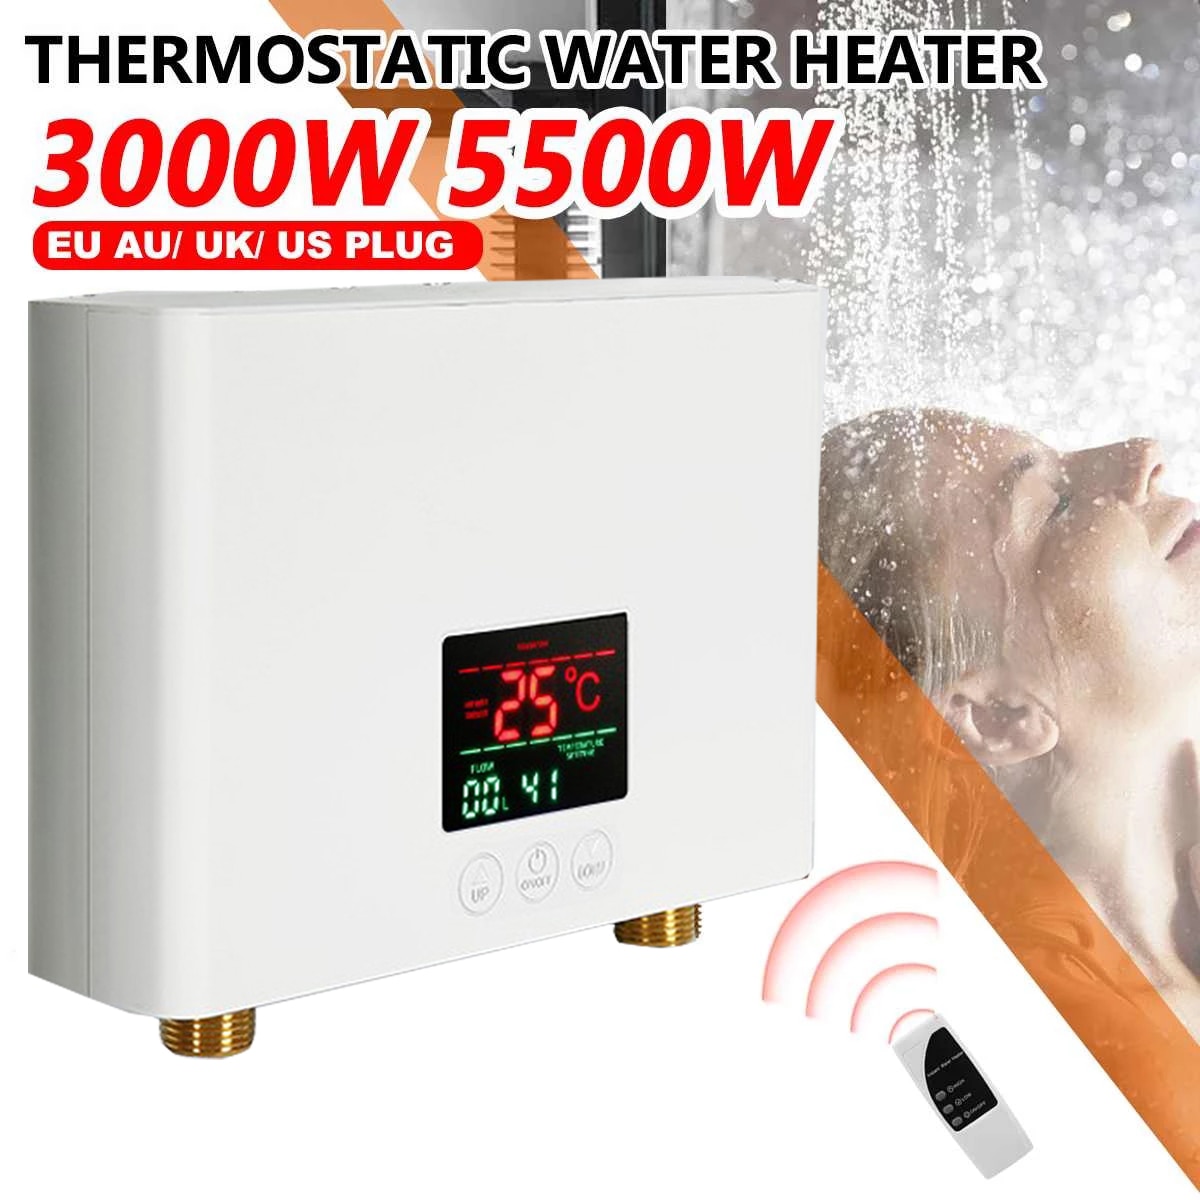 Electric Tankless Water Heater 5500W for Hot Water Heating Kitchen Bathroom Shower Wall or Floor Mounted Can Adjust Temperature